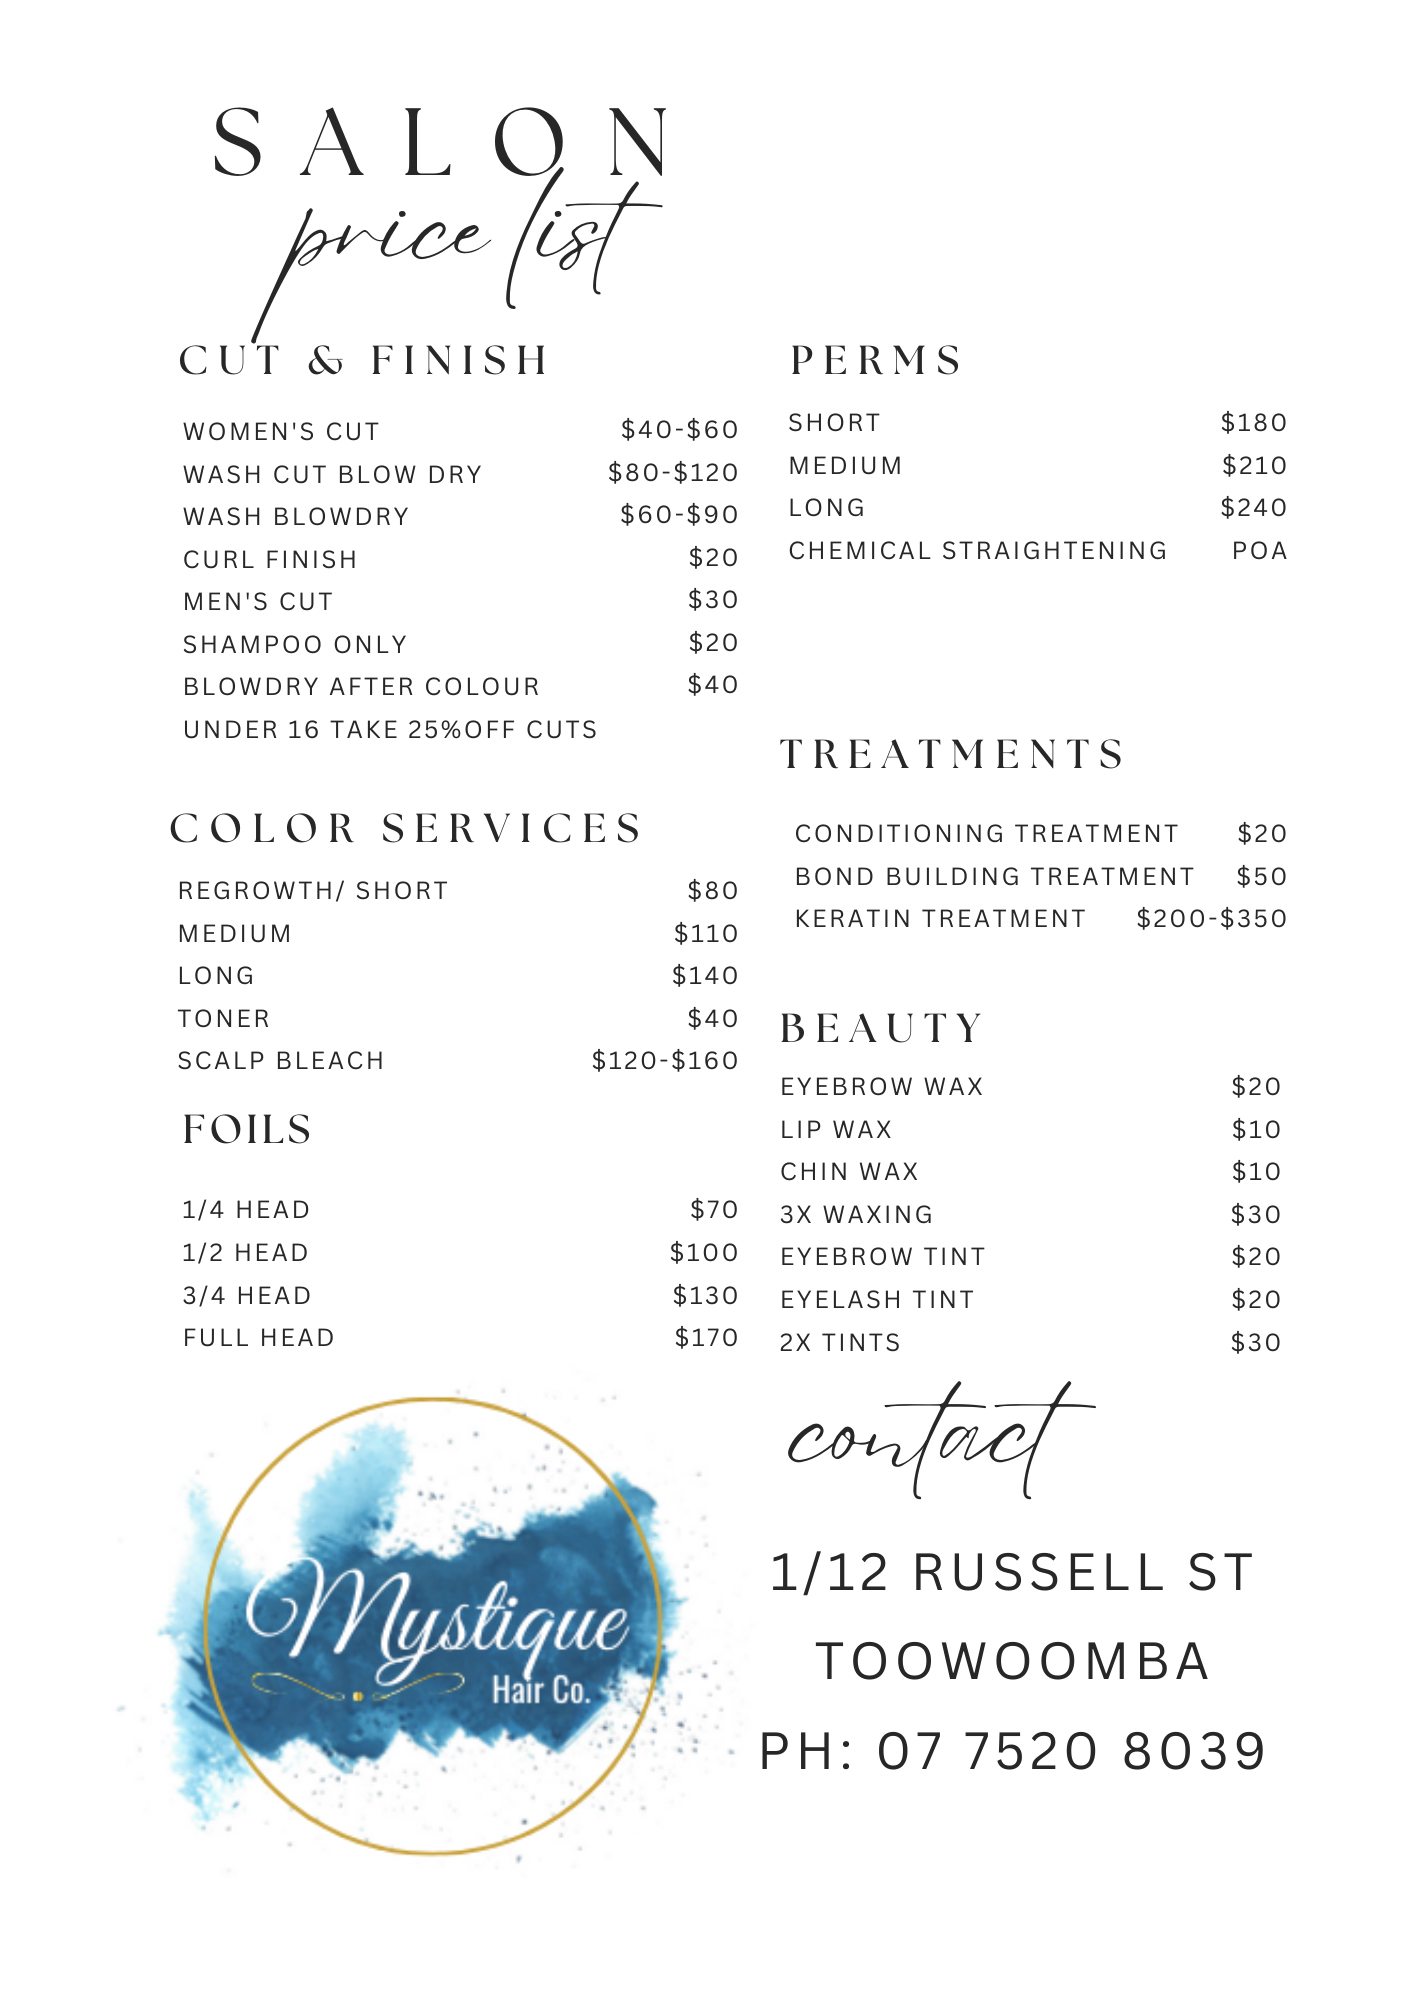 Mystique Hair Co Toowoomba Hairdressing & Barbering Pricelist